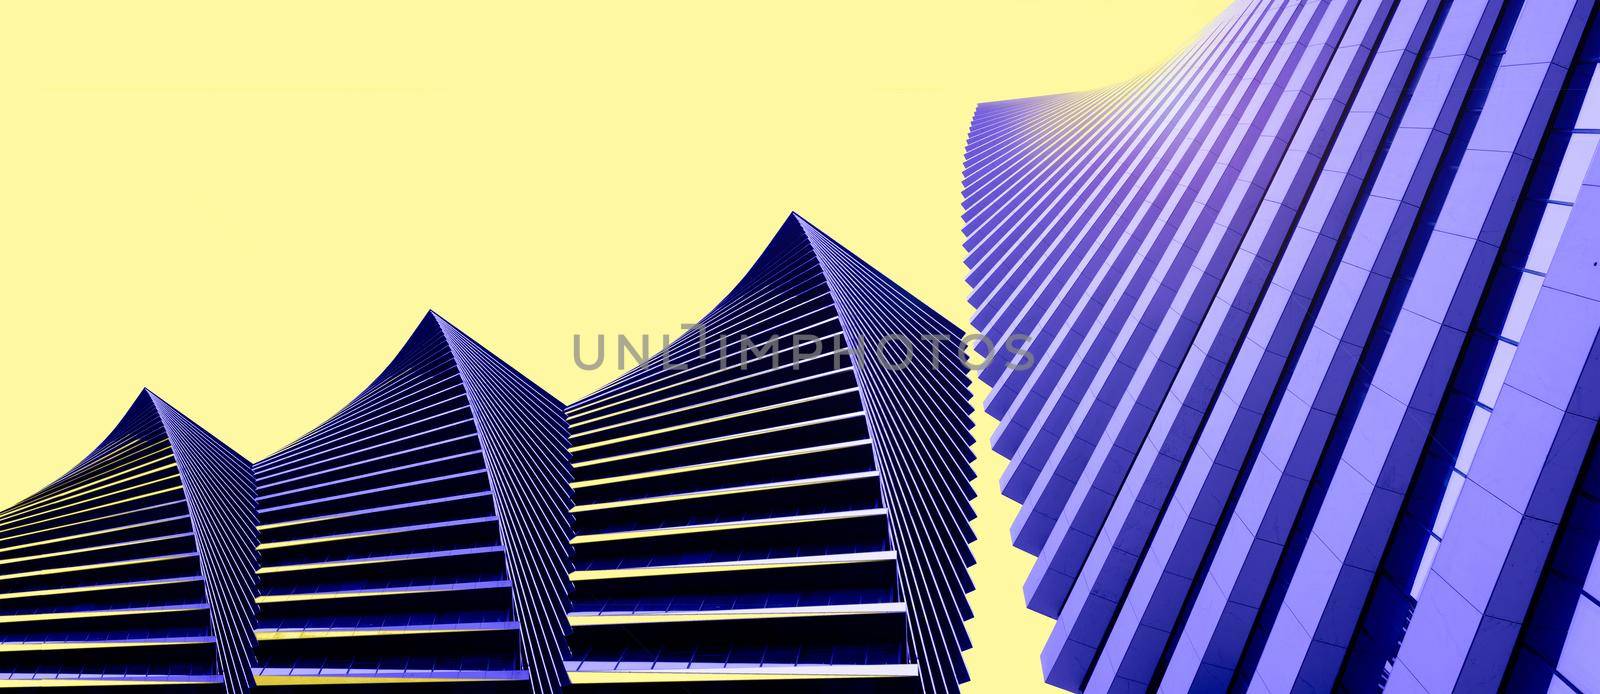 Abstract background on the theme of technology. Presentation banner or aoster cover. Purple houses against a yellow sky. Cut object. Copy paste space for your text or design